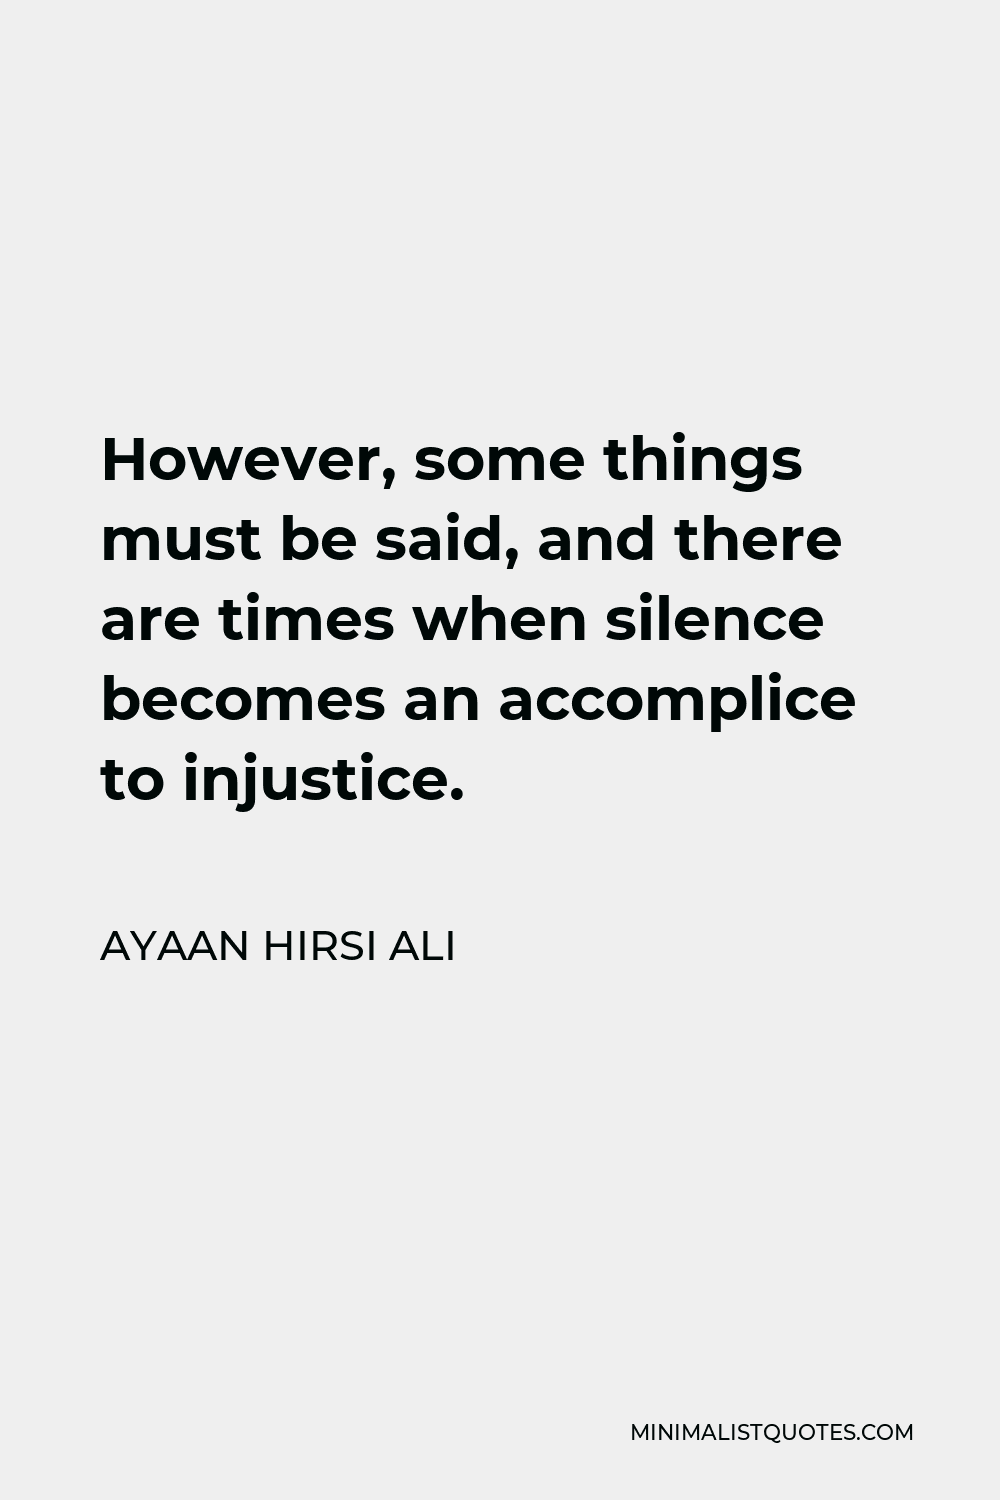 Ayaan Hirsi Ali Quote - However, some things must be said, and there are times when silence becomes an accomplice to injustice.